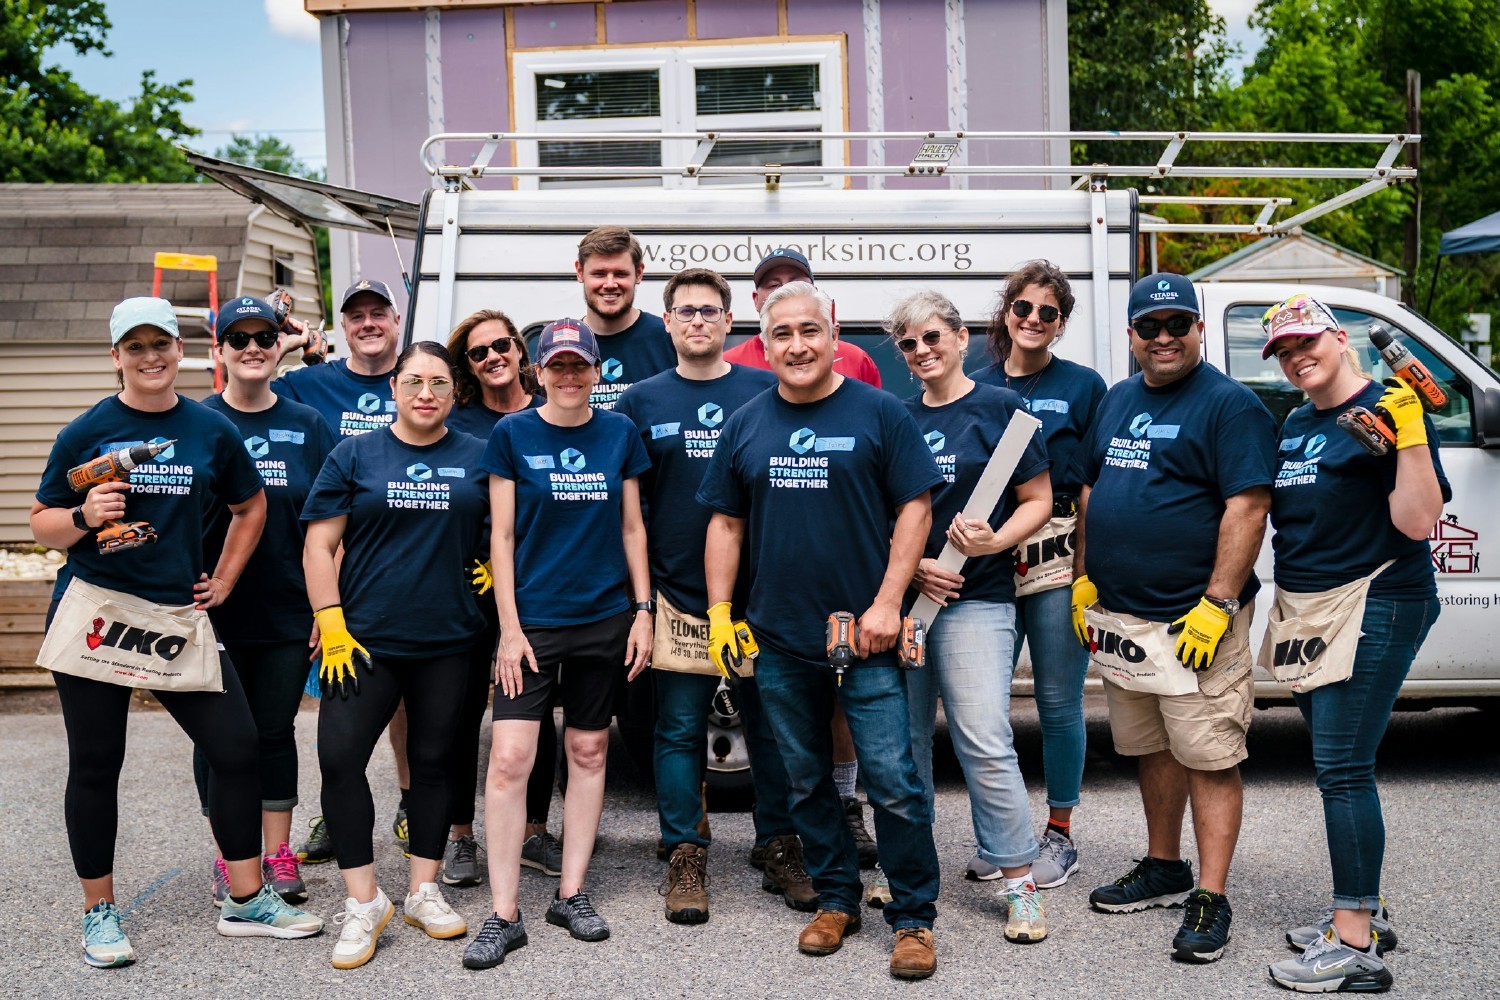 Citadel employees connecting and serving our community by participating in a monthly corporate volunteer day.